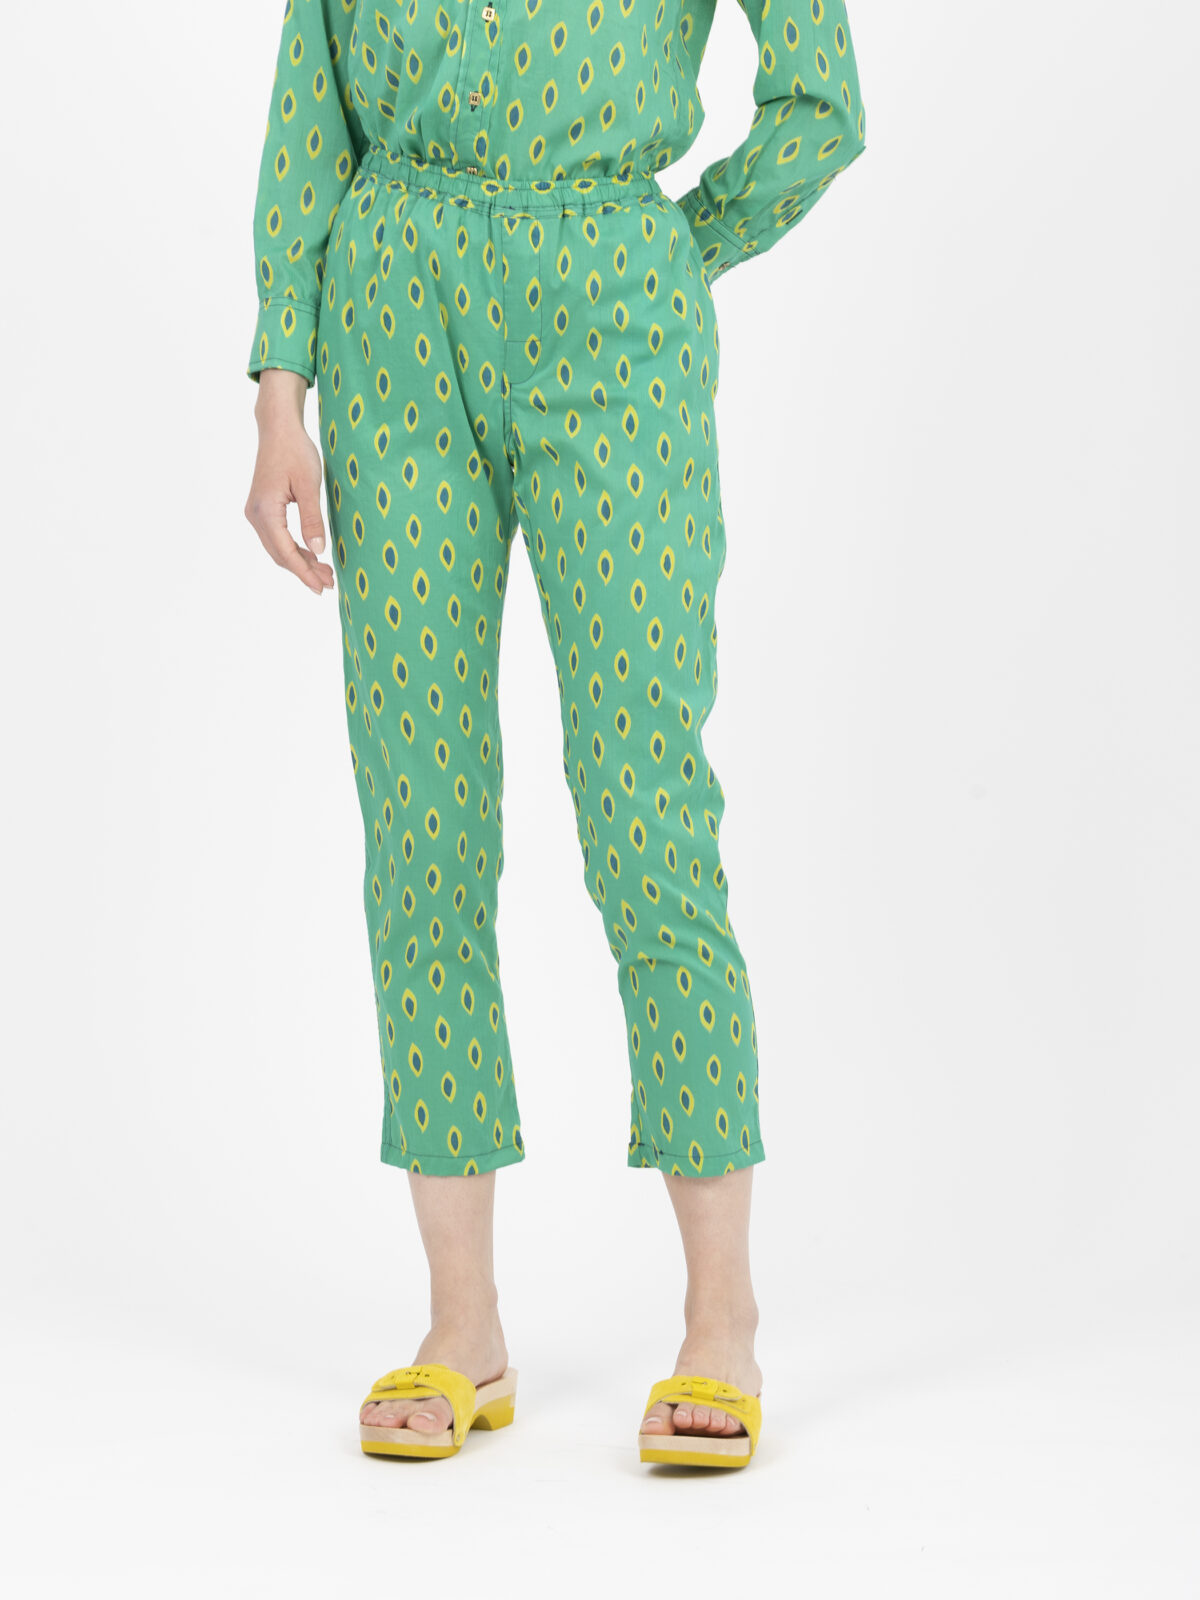 ravilo-green-eyes-voile-cotton-trousers-relaxed-kimale-greek-designers-matchboxathens